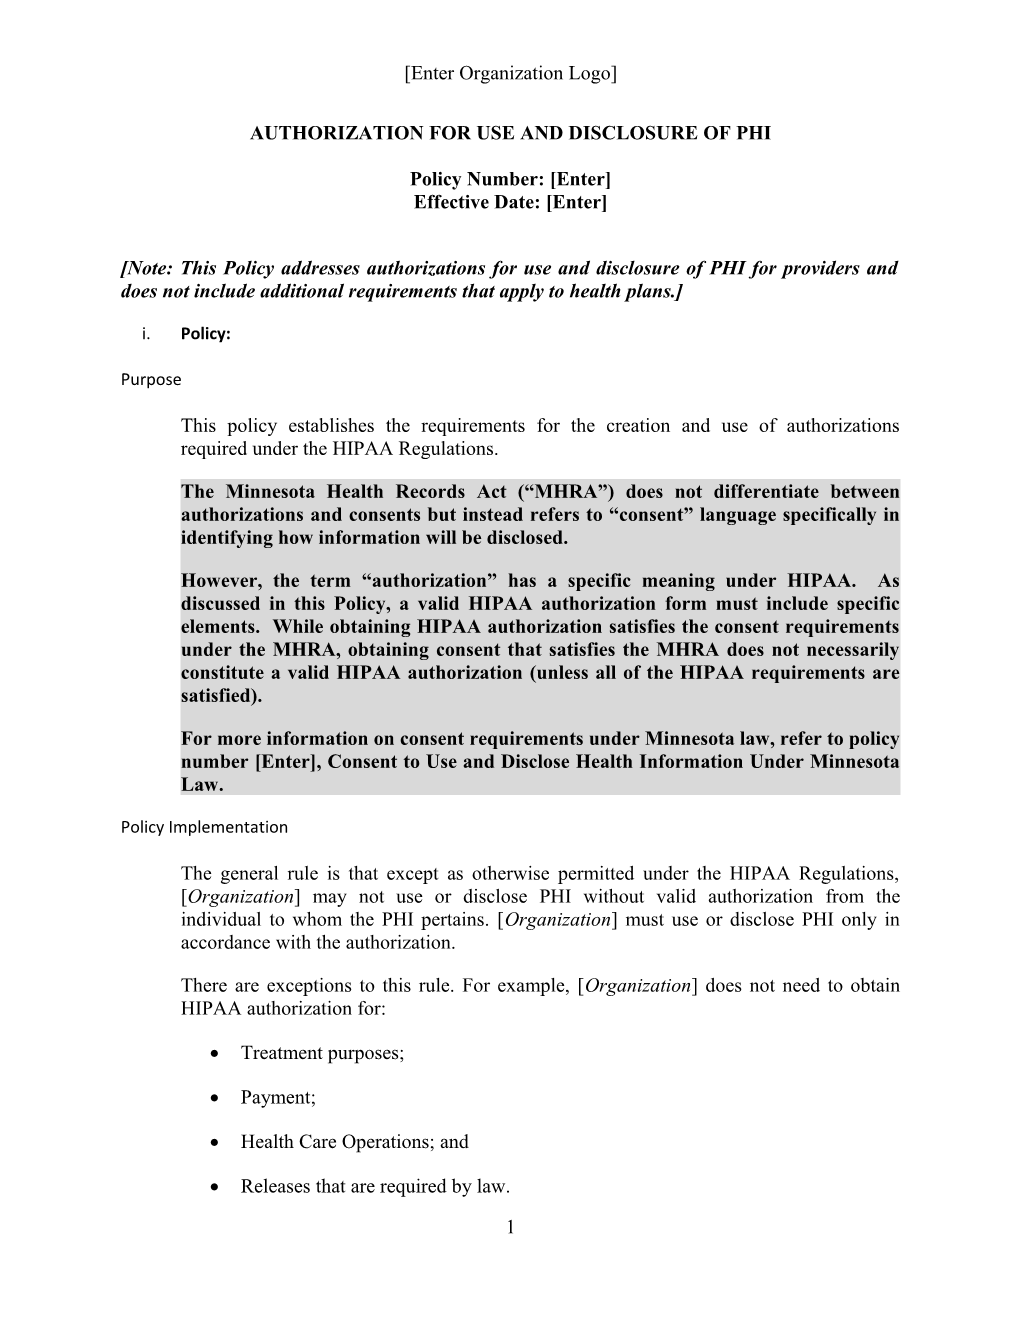 Authorization for Use and Disclosure of PHI